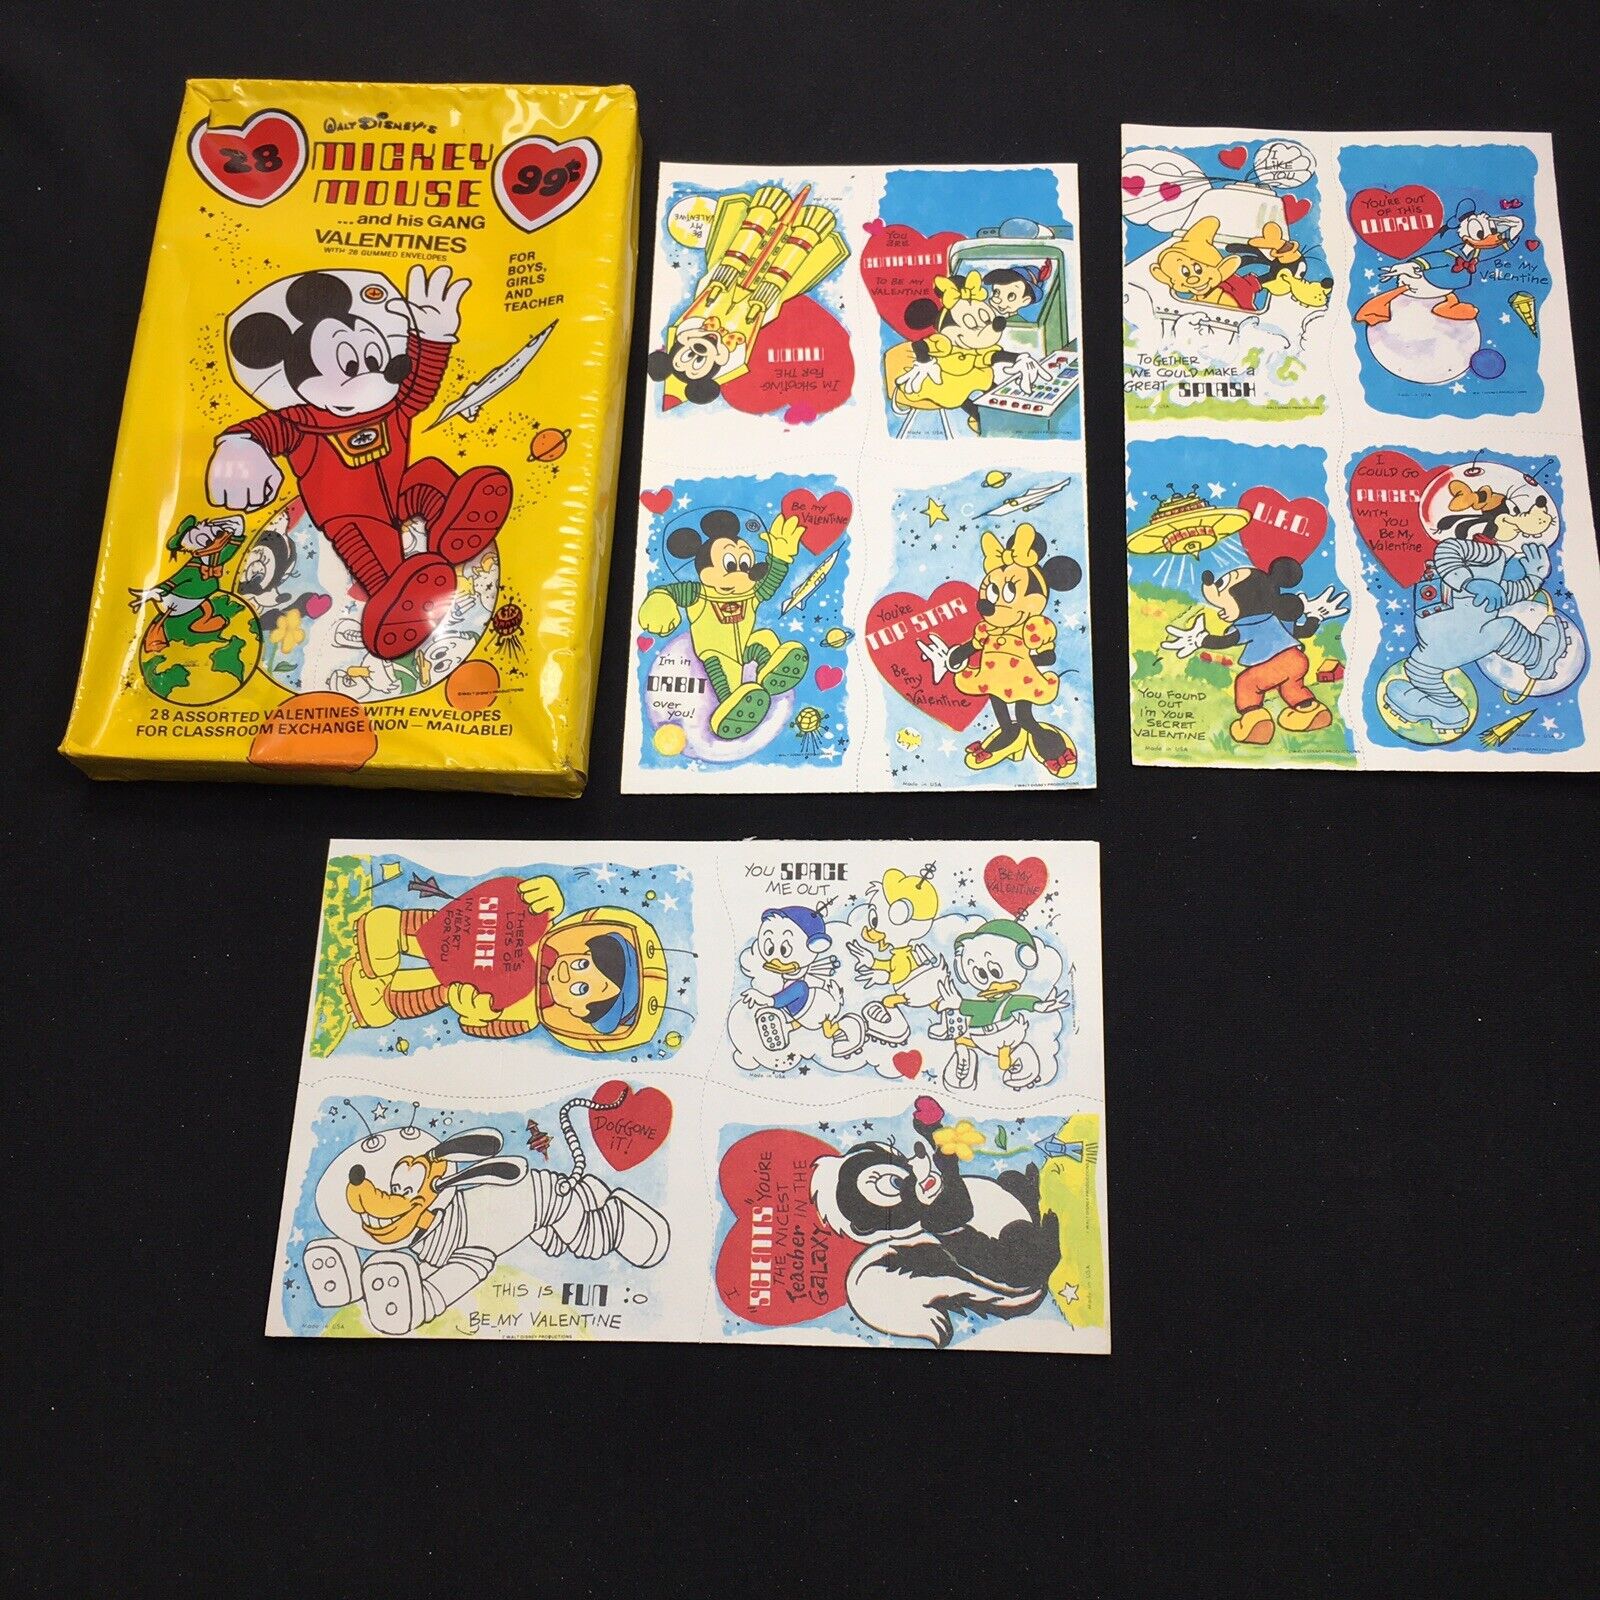 Vintage Disney Mickey Mouse & His Gang Valentines Day Cards 28 pc Box Set